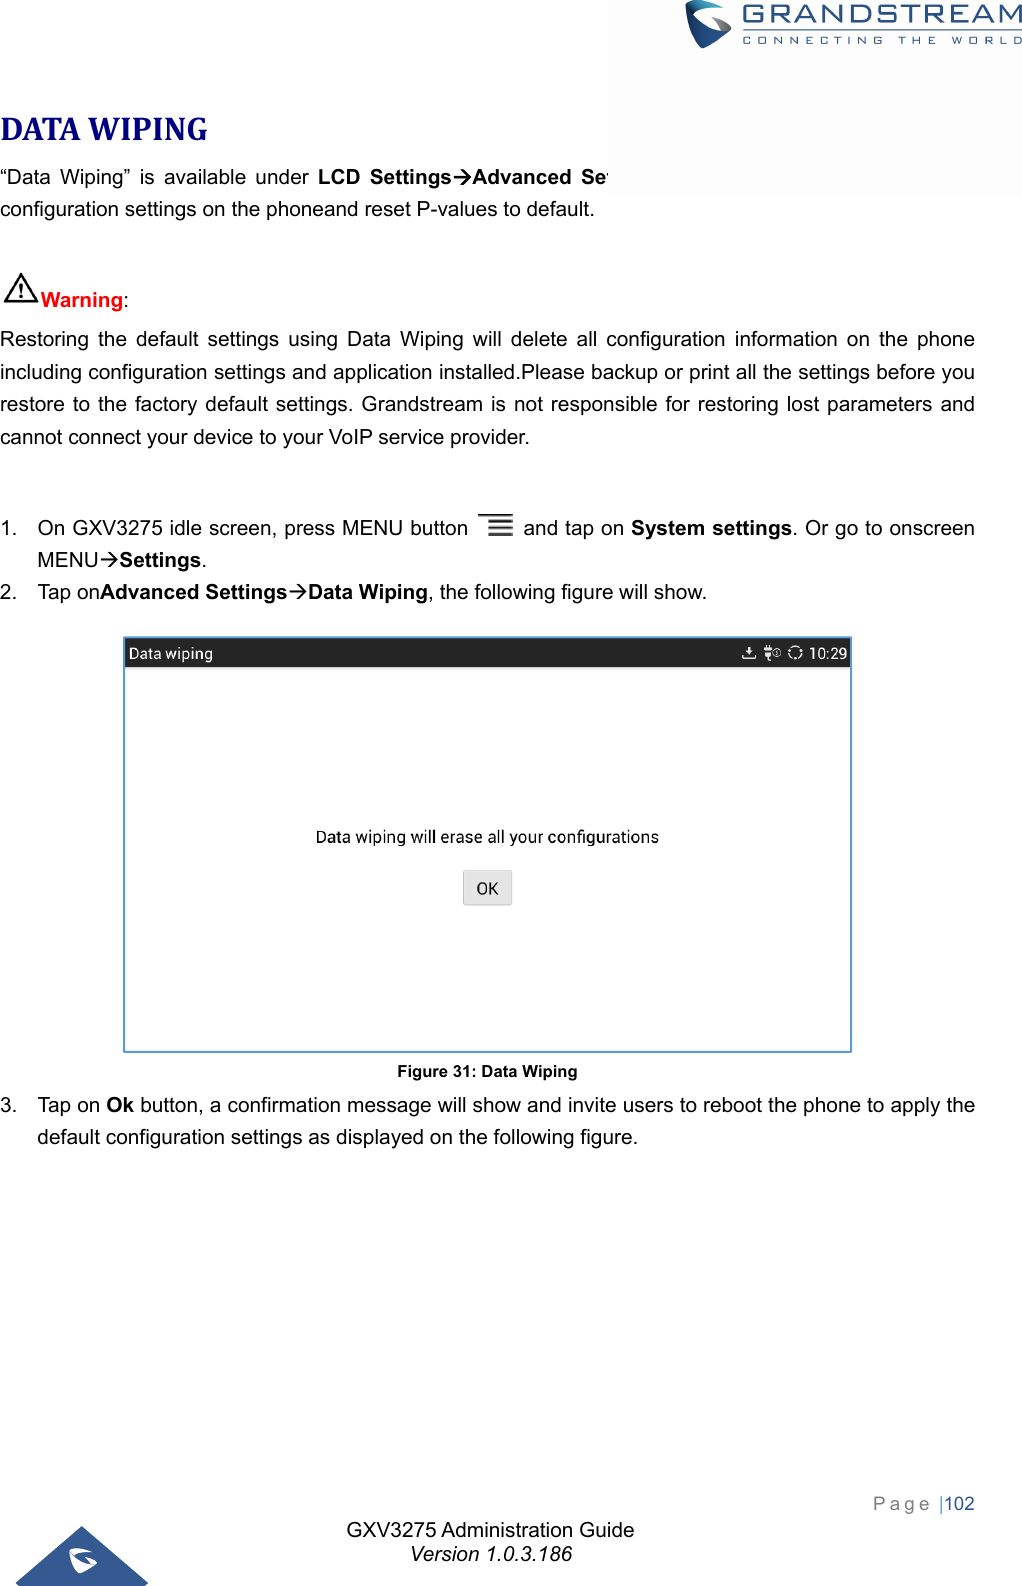 GXV3275 Administration Guide Version 1.0.3.186 Page |102  DATAWIPING“Data Wiping” is available under LCD SettingsAdvanced Settings and itallows users to restore all configuration settings on the phoneand reset P-values to default.  Warning:  Restoring the default settings using Data Wiping will delete all configuration information on the phone including configuration settings and application installed.Please backup or print all the settings before you restore to the factory default settings. Grandstream is not responsible for restoring lost parameters and cannot connect your device to your VoIP service provider.  1.  On GXV3275 idle screen, press MENU button    and tap on System settings. Or go to onscreen MENUSettings. 2. Tap onAdvanced SettingsData Wiping, the following figure will show.  Figure 31: Data Wiping 3. Tap on Ok button, a confirmation message will show and invite users to reboot the phone to apply the default configuration settings as displayed on the following figure.  